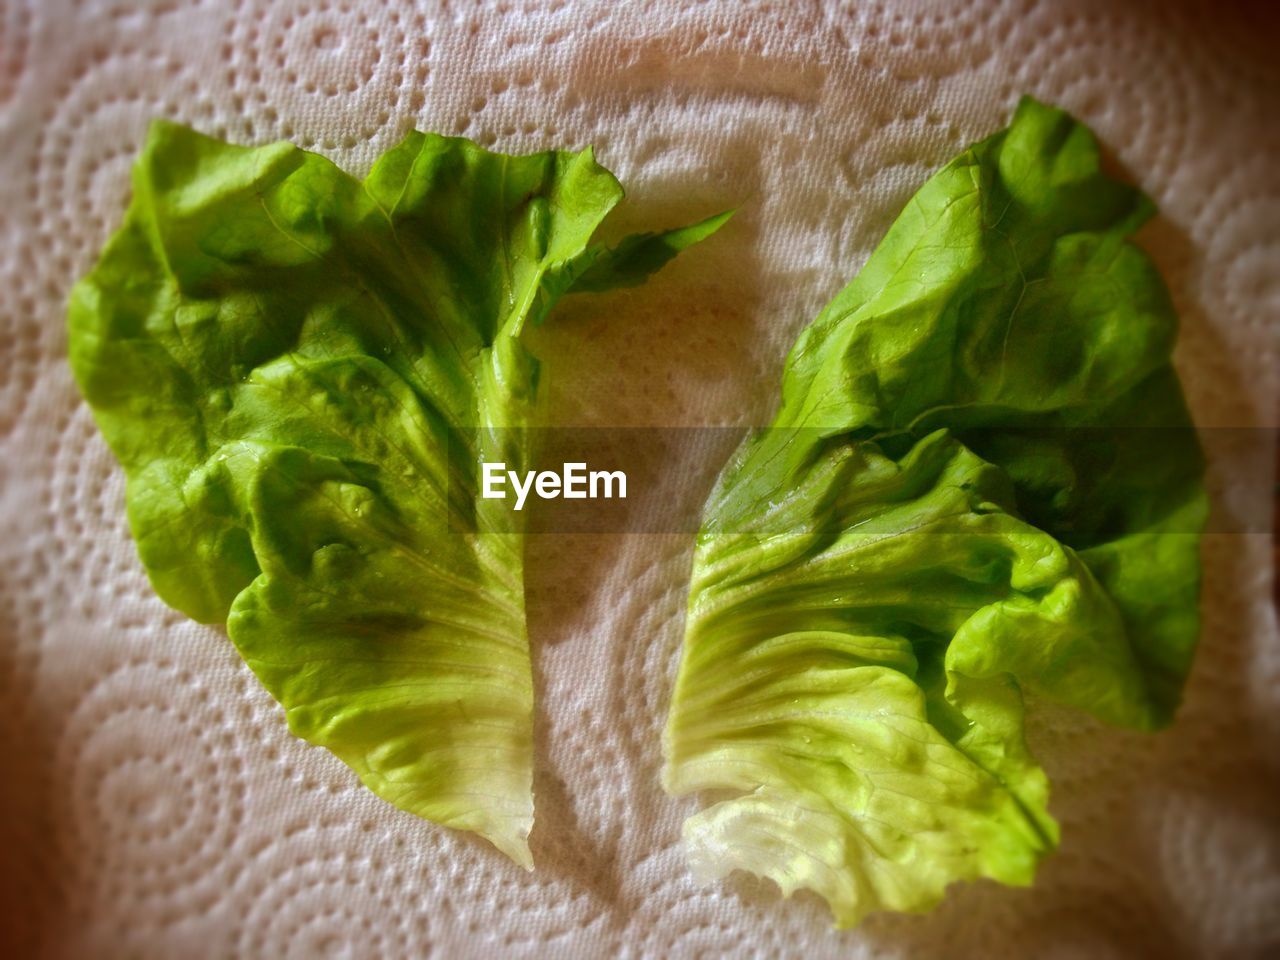 Close-up of lettuce leaves on tablecloth